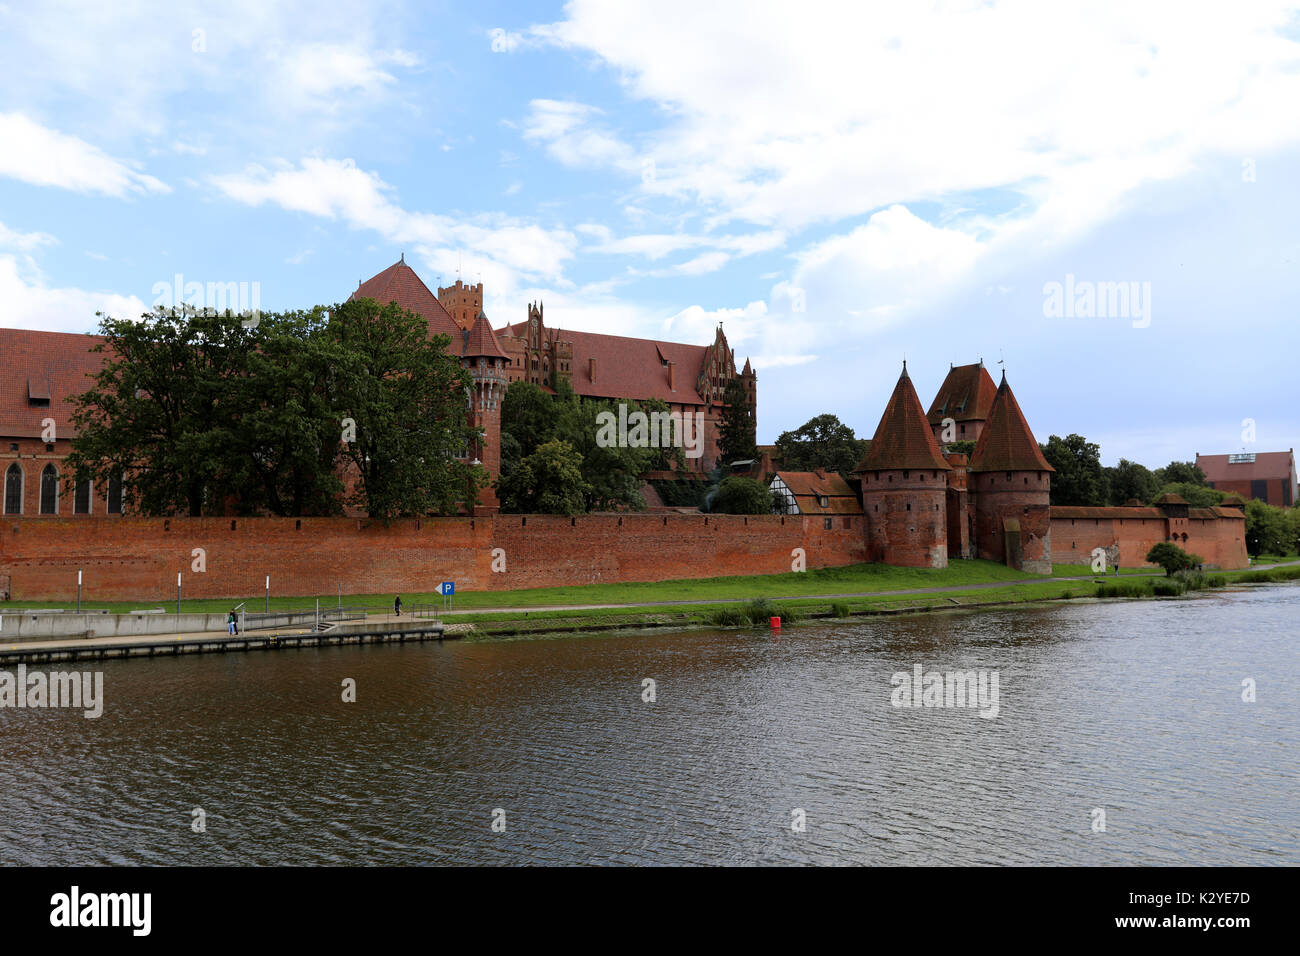 The Nogat river and Malbork Castle, which was built by the Teutonic Knights in the town of Malbork, Poland, photographed on 21 August 2017 Stock Photo